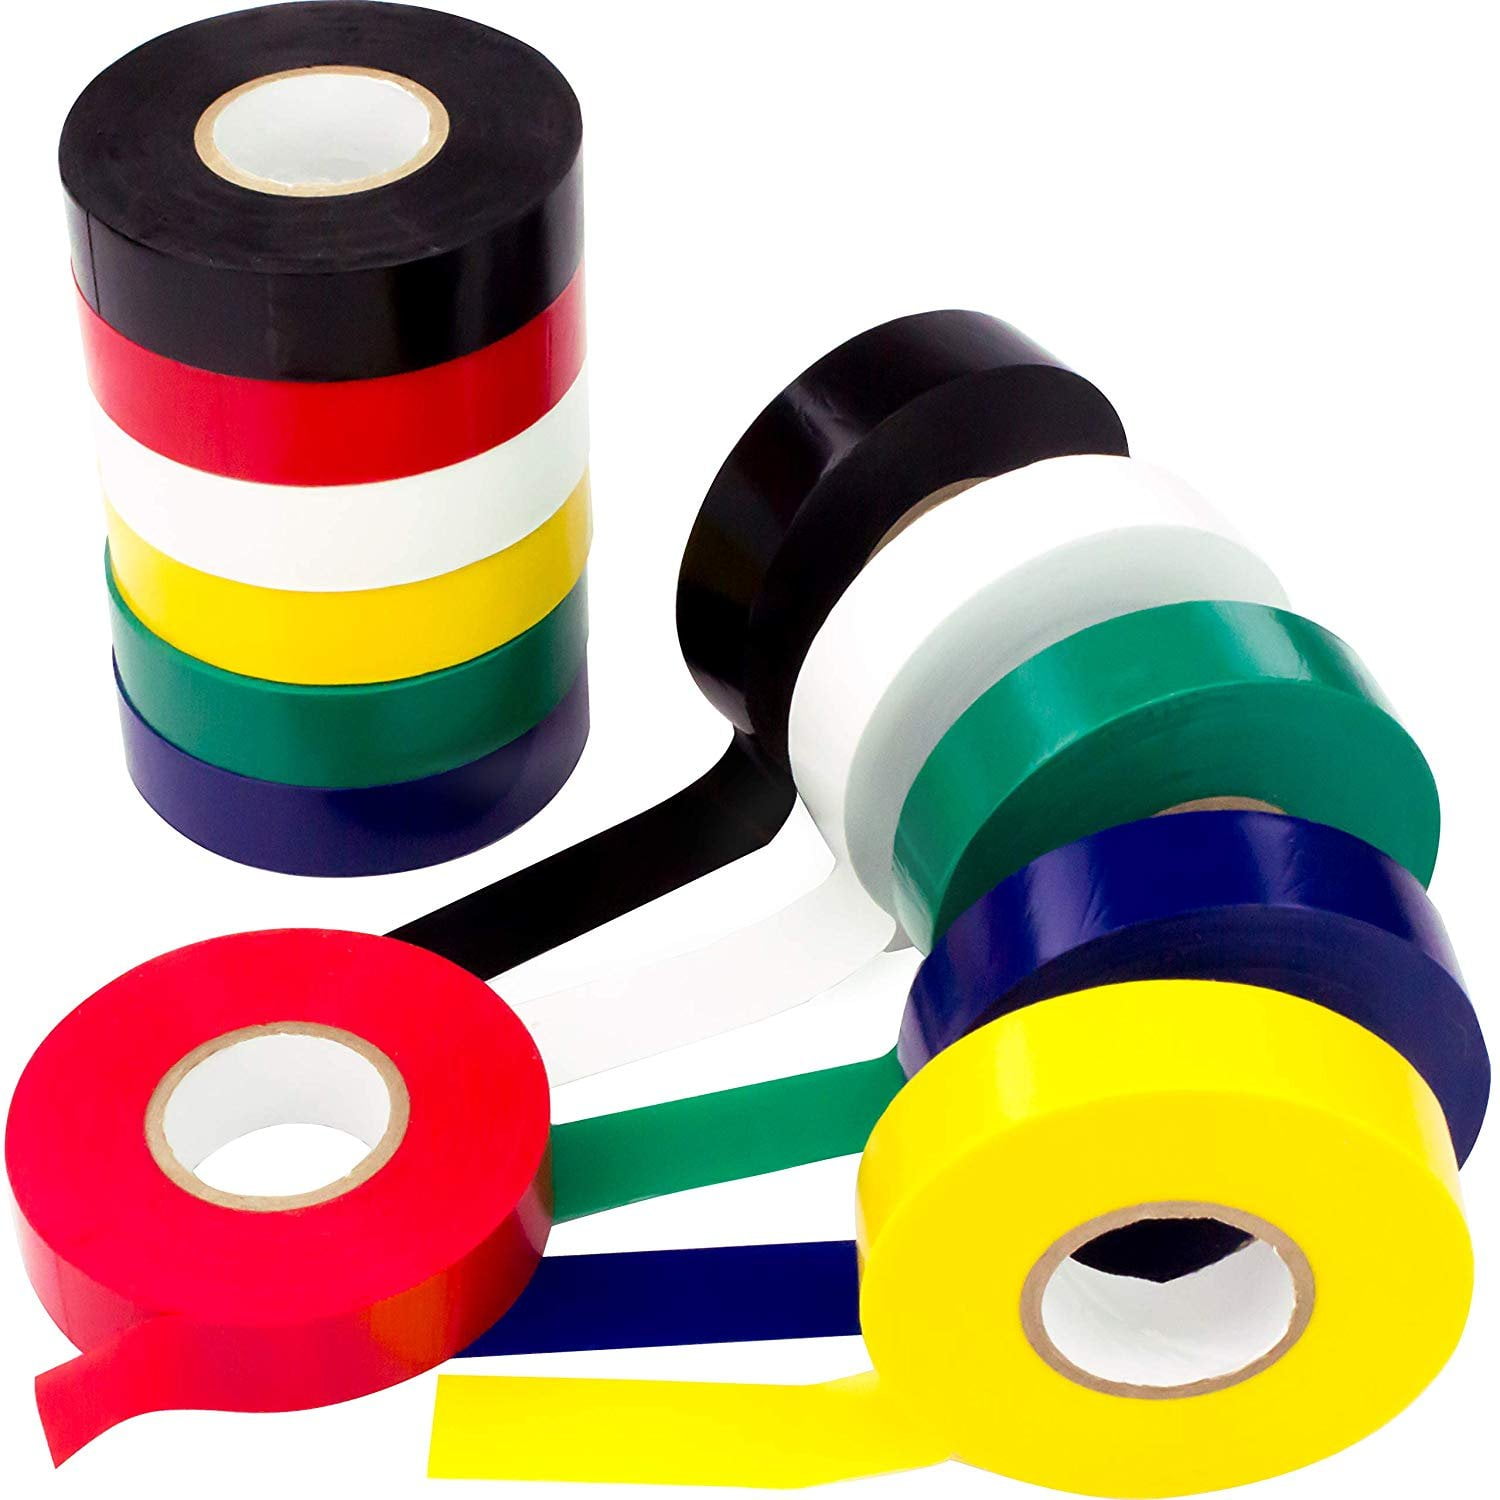 Weather-Resistant Colored Electrical Tape 60 Jumbo Roll 12 Pack by Nova